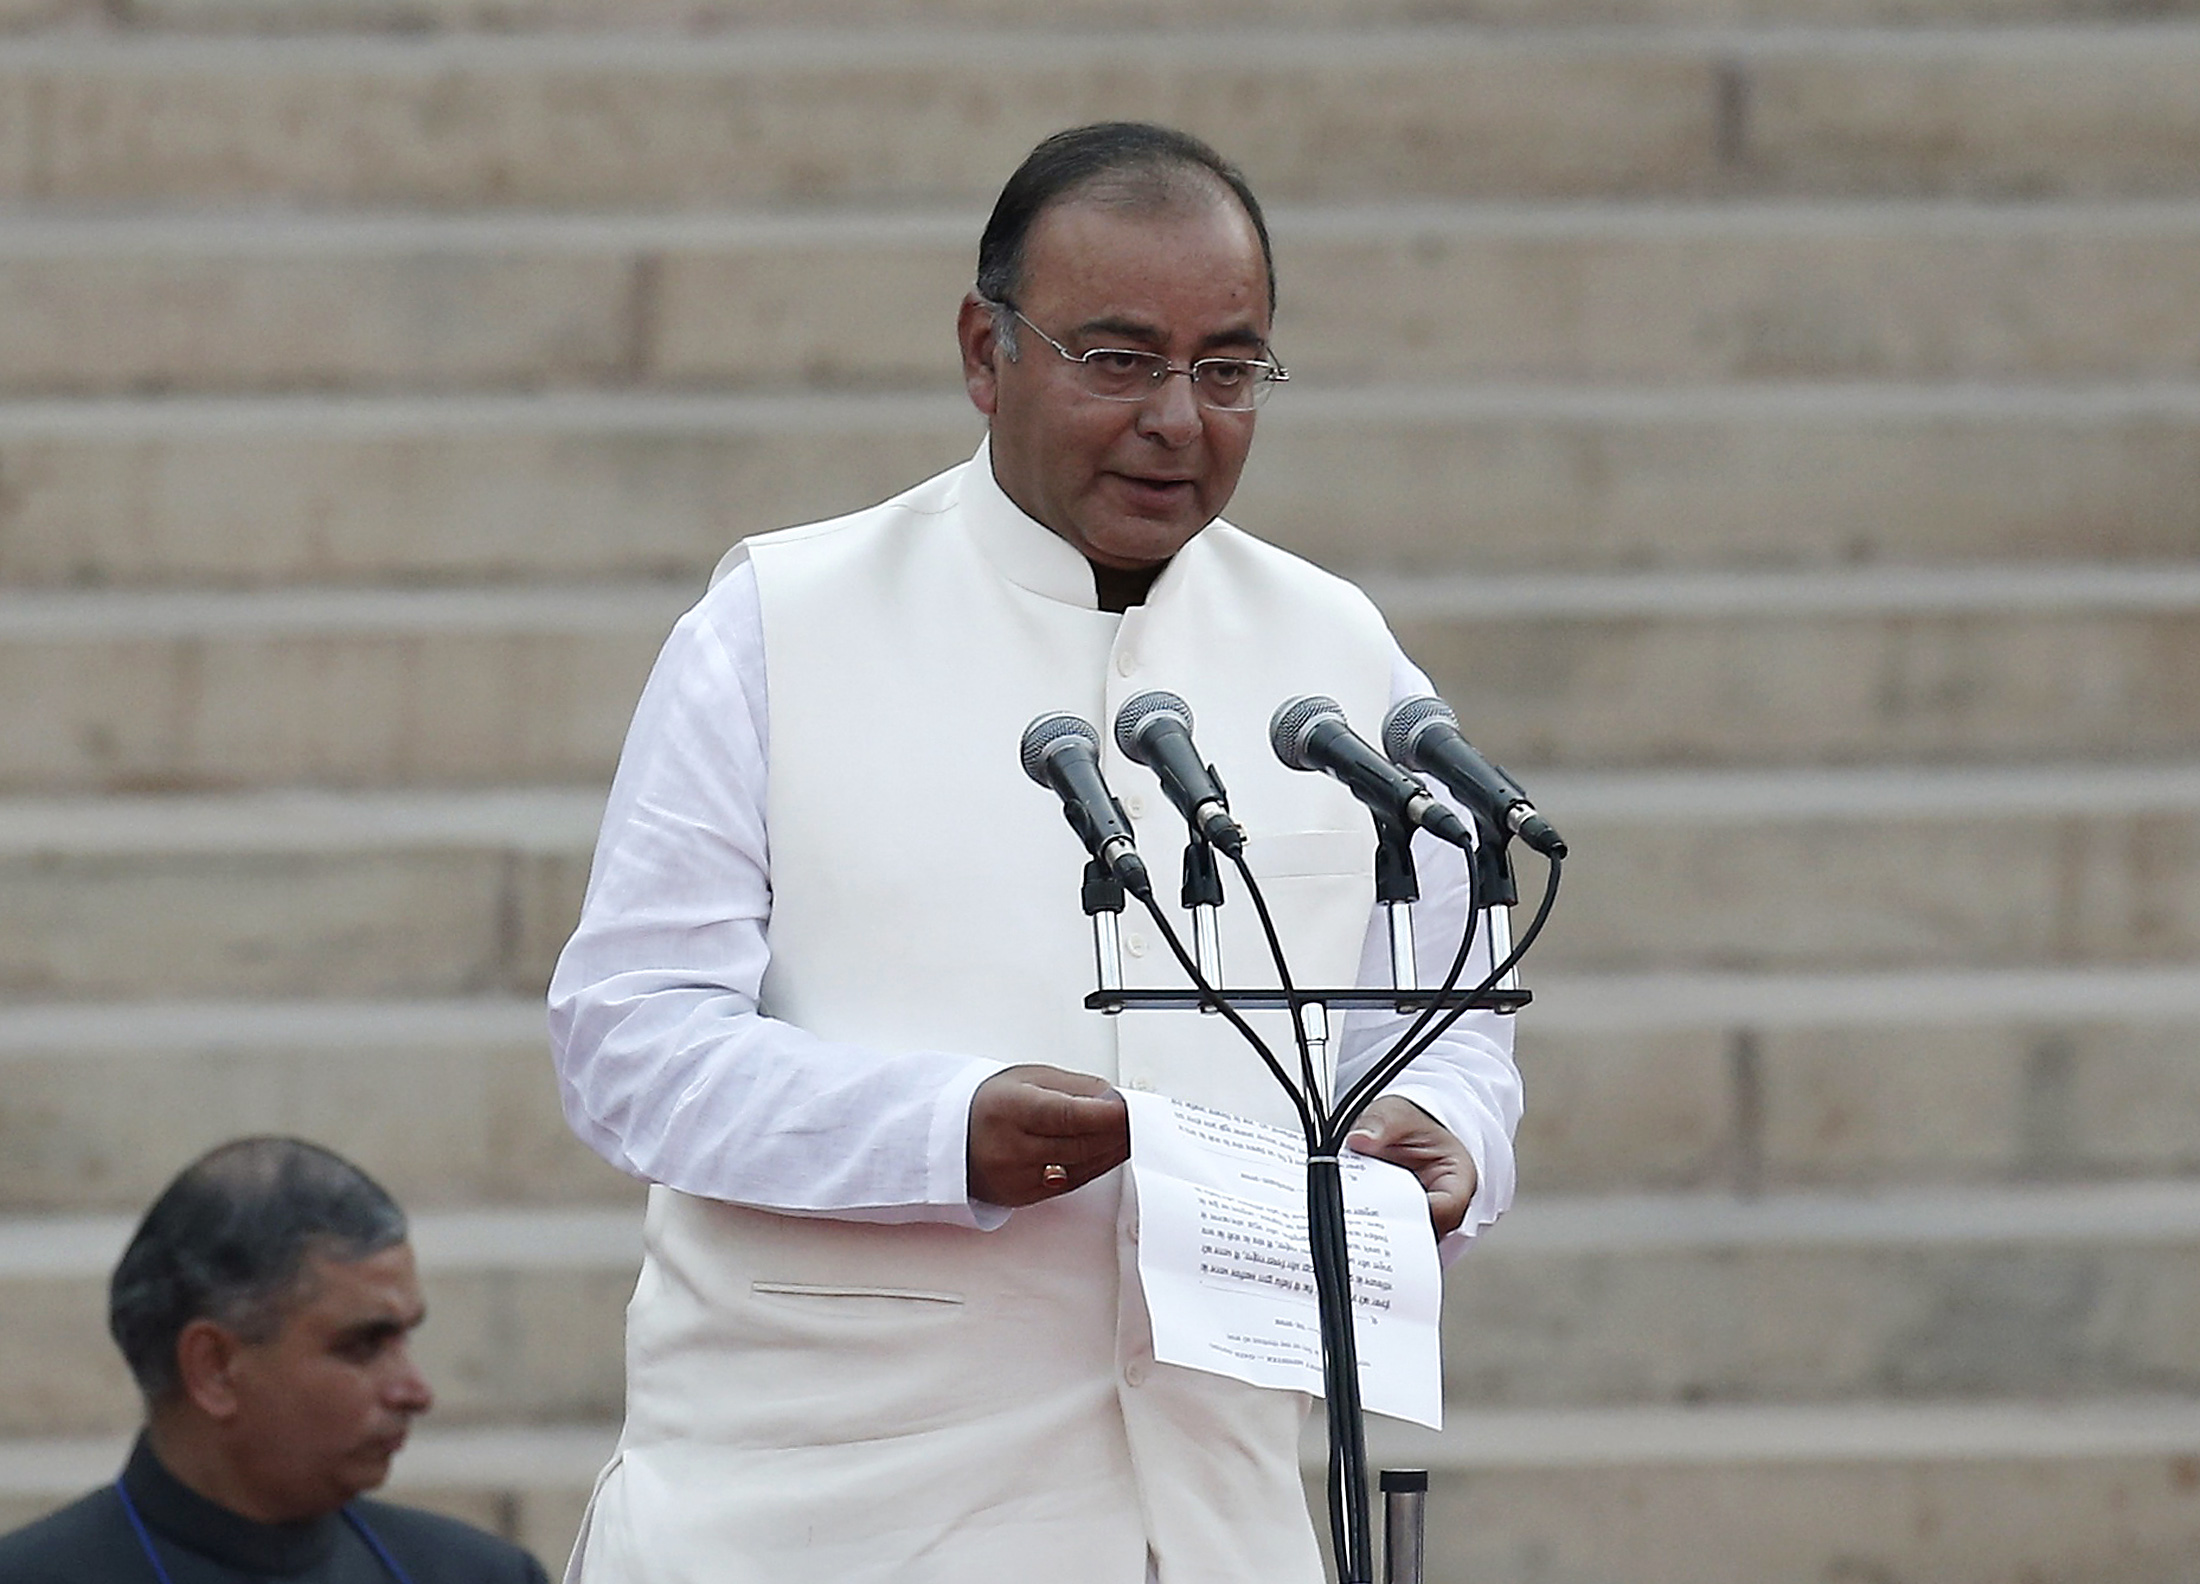 Jaitley is administered oath of office by India's President Mukherjee as a cabinet minister at the presidential palace in New Delhi